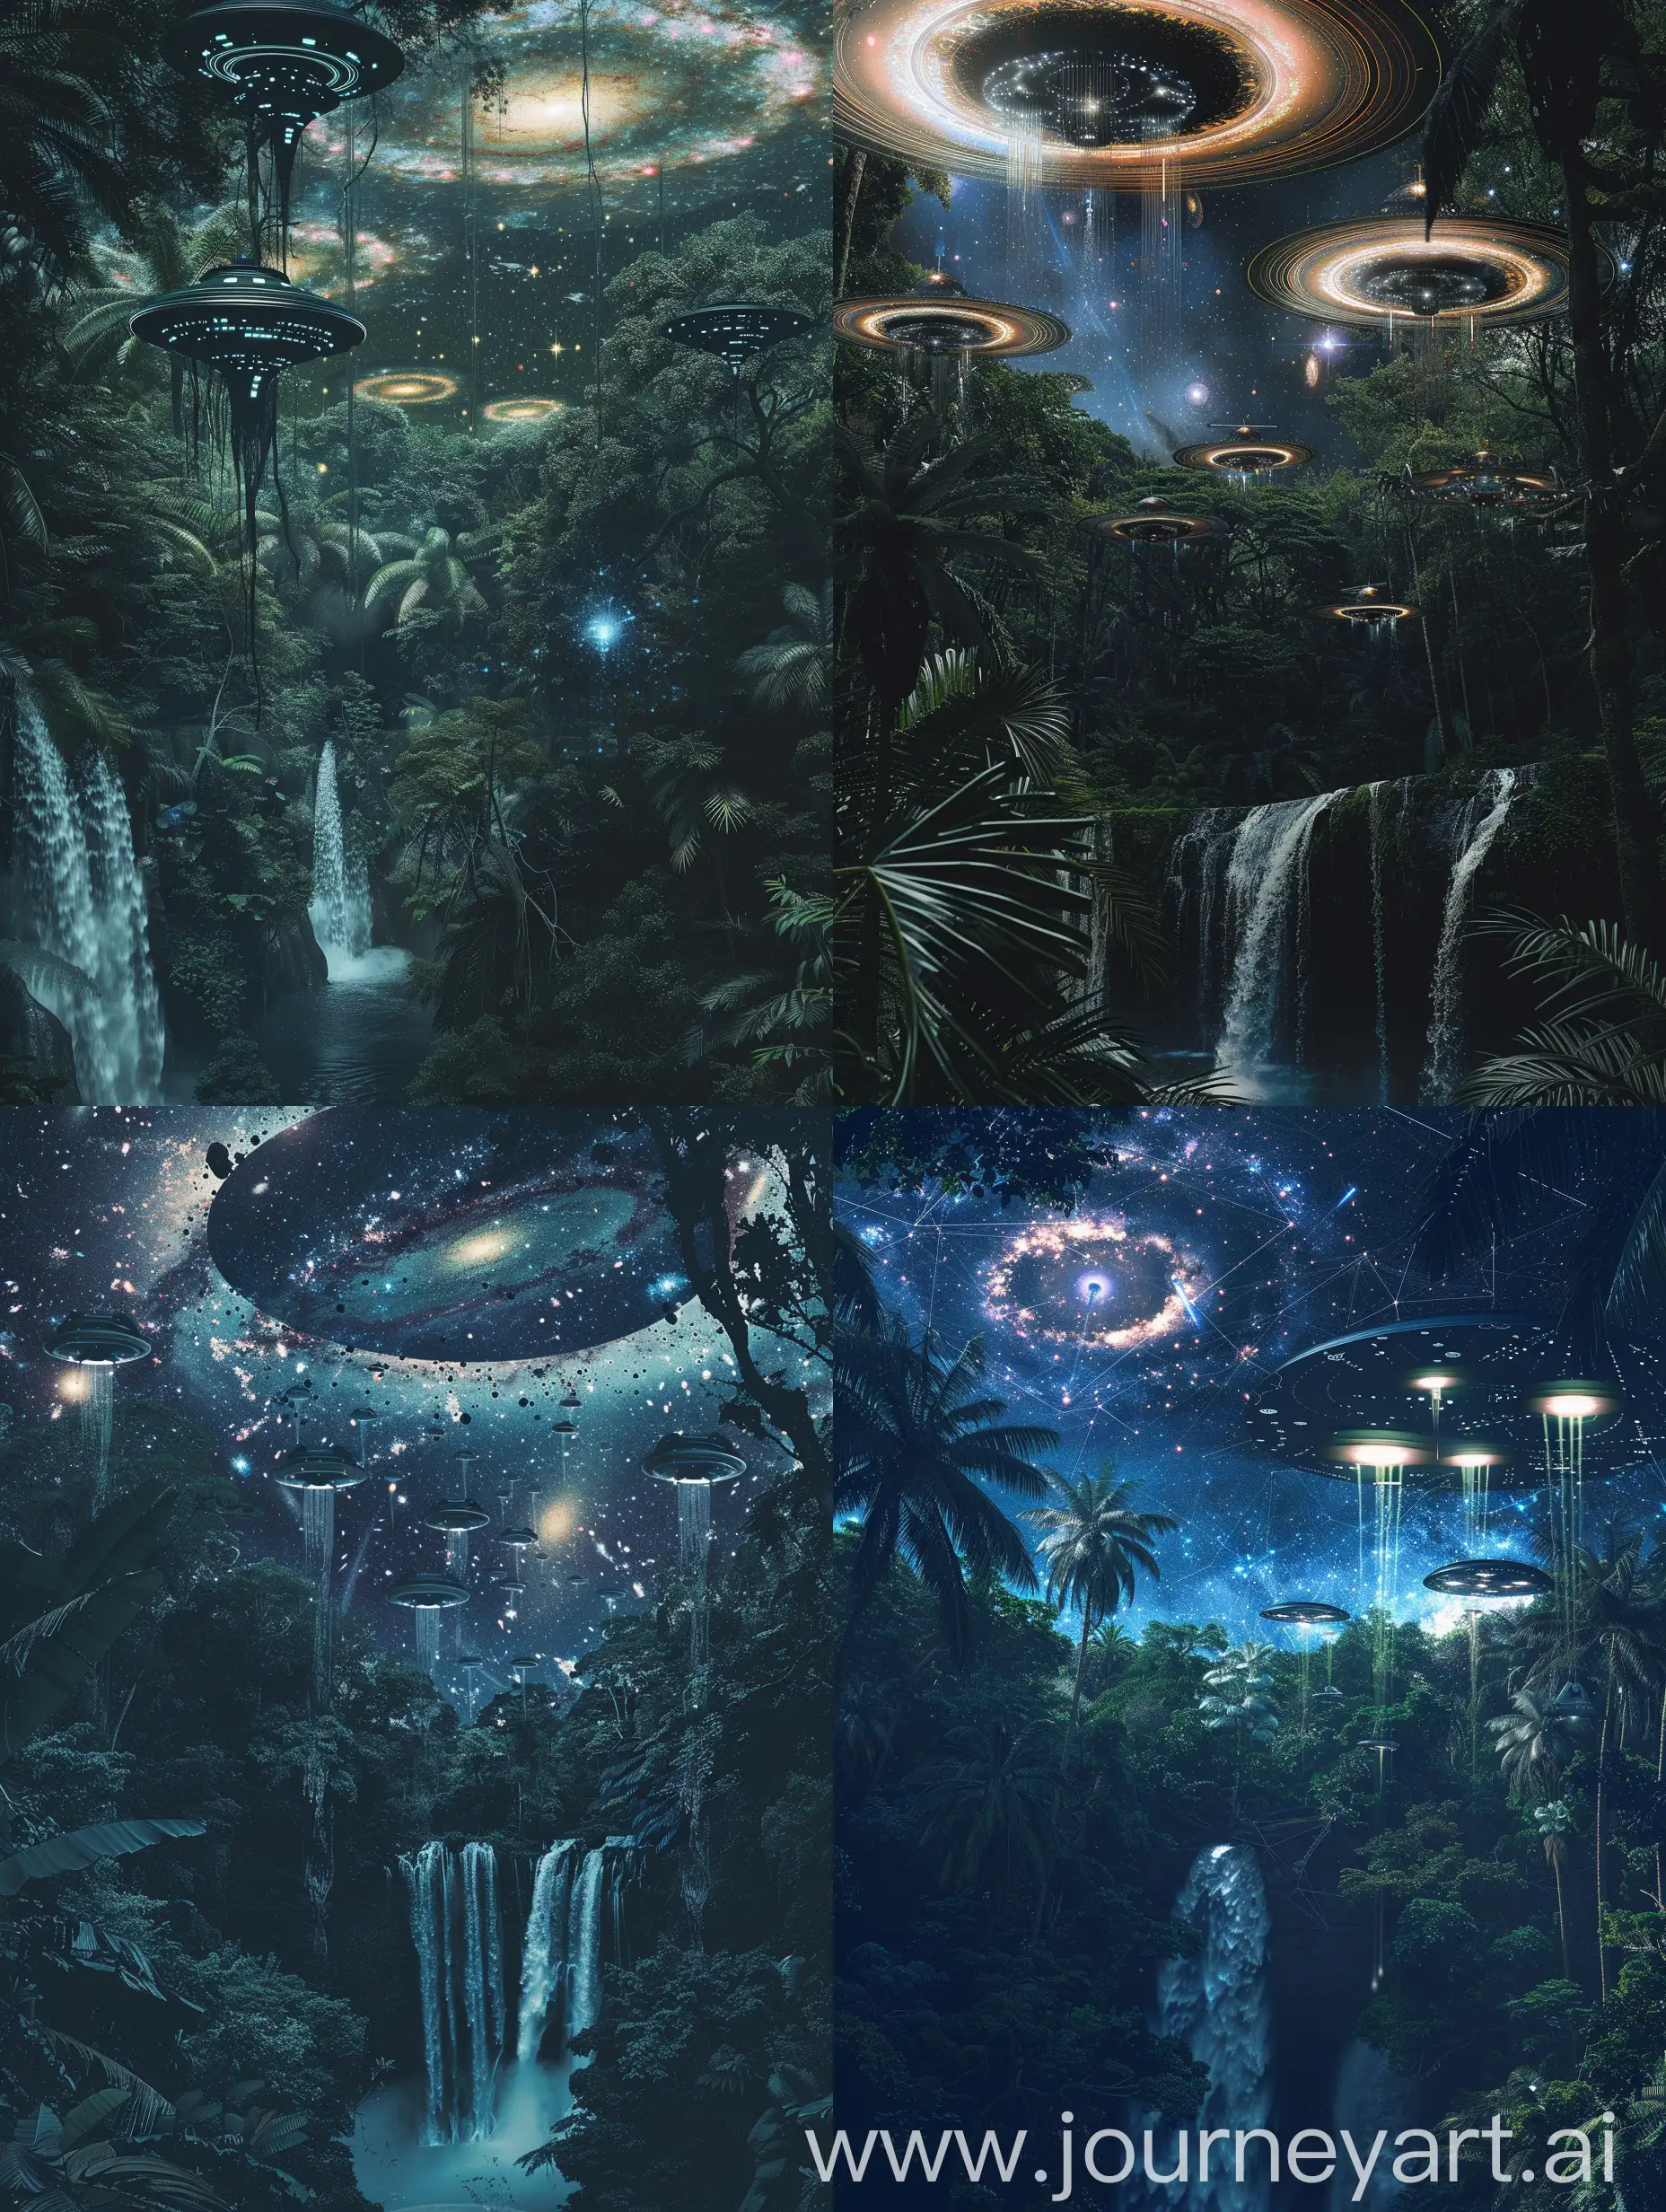 Dark forest jungle with dark night with galxy hols flying alien speaceships with water fall flying aliens creatures goematric patterns